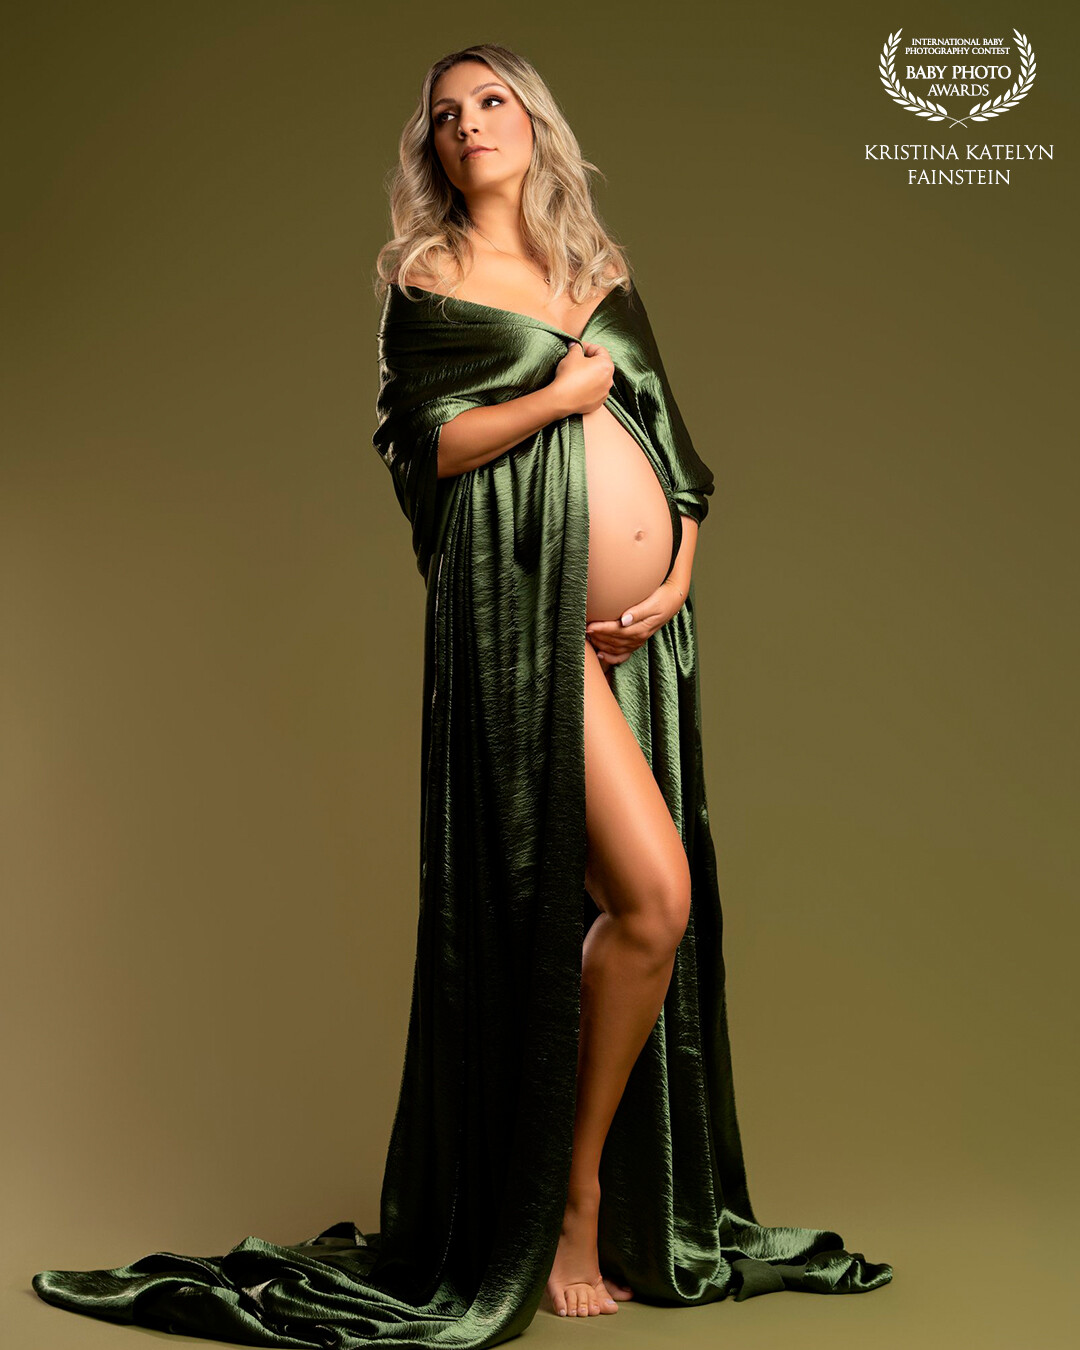 "Radiant in Emerald" this is how we redefined elegance with this gorgeous Momma session.